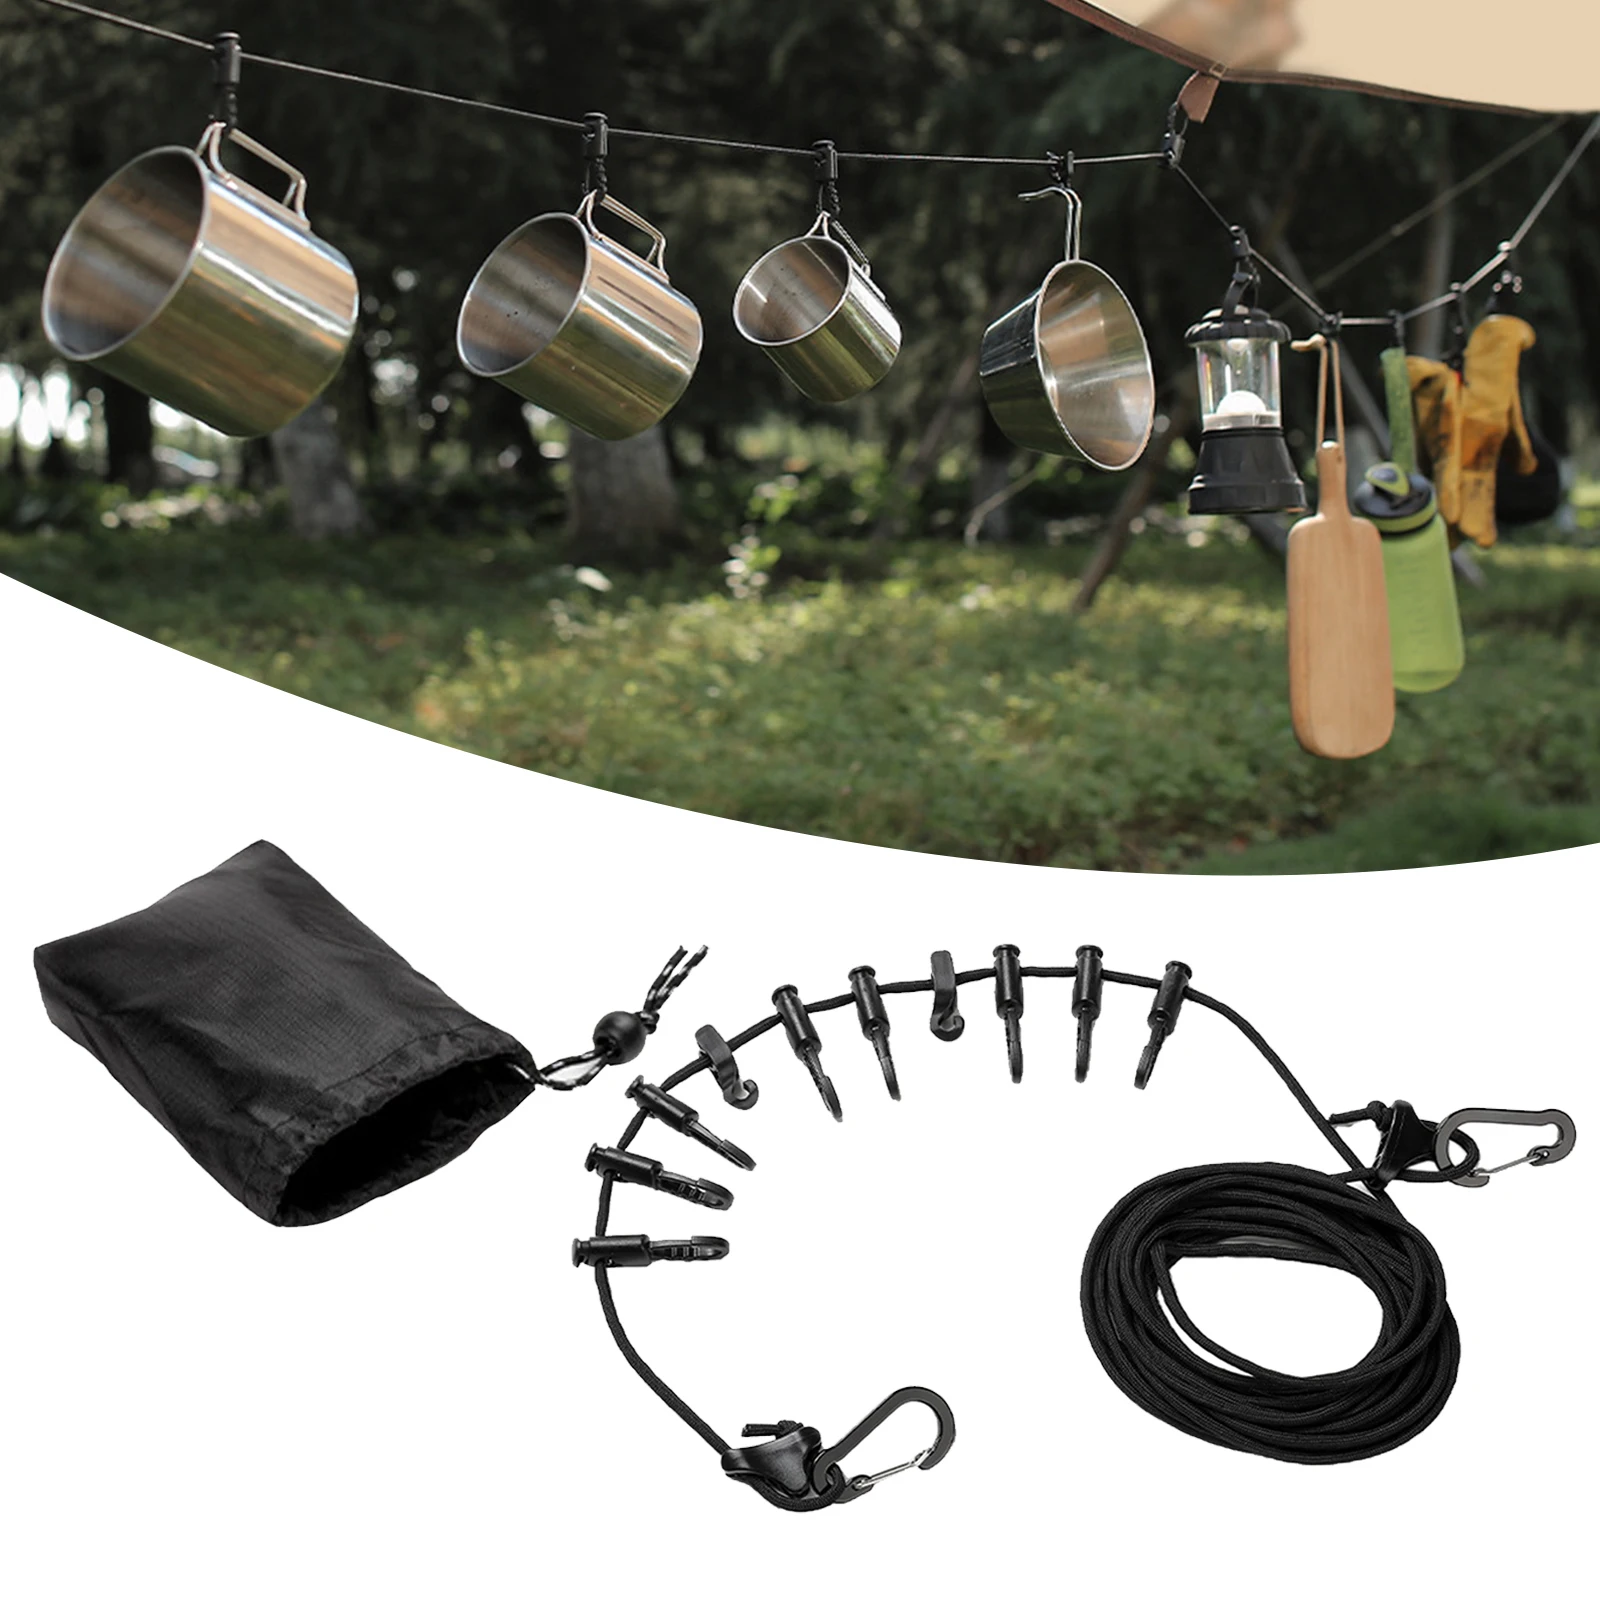 Rope Outdoor Camping Gear and Accessories Clothesline Storage Strap Hammock Tent Hanger Lanyard Strap Supplies Outdoor